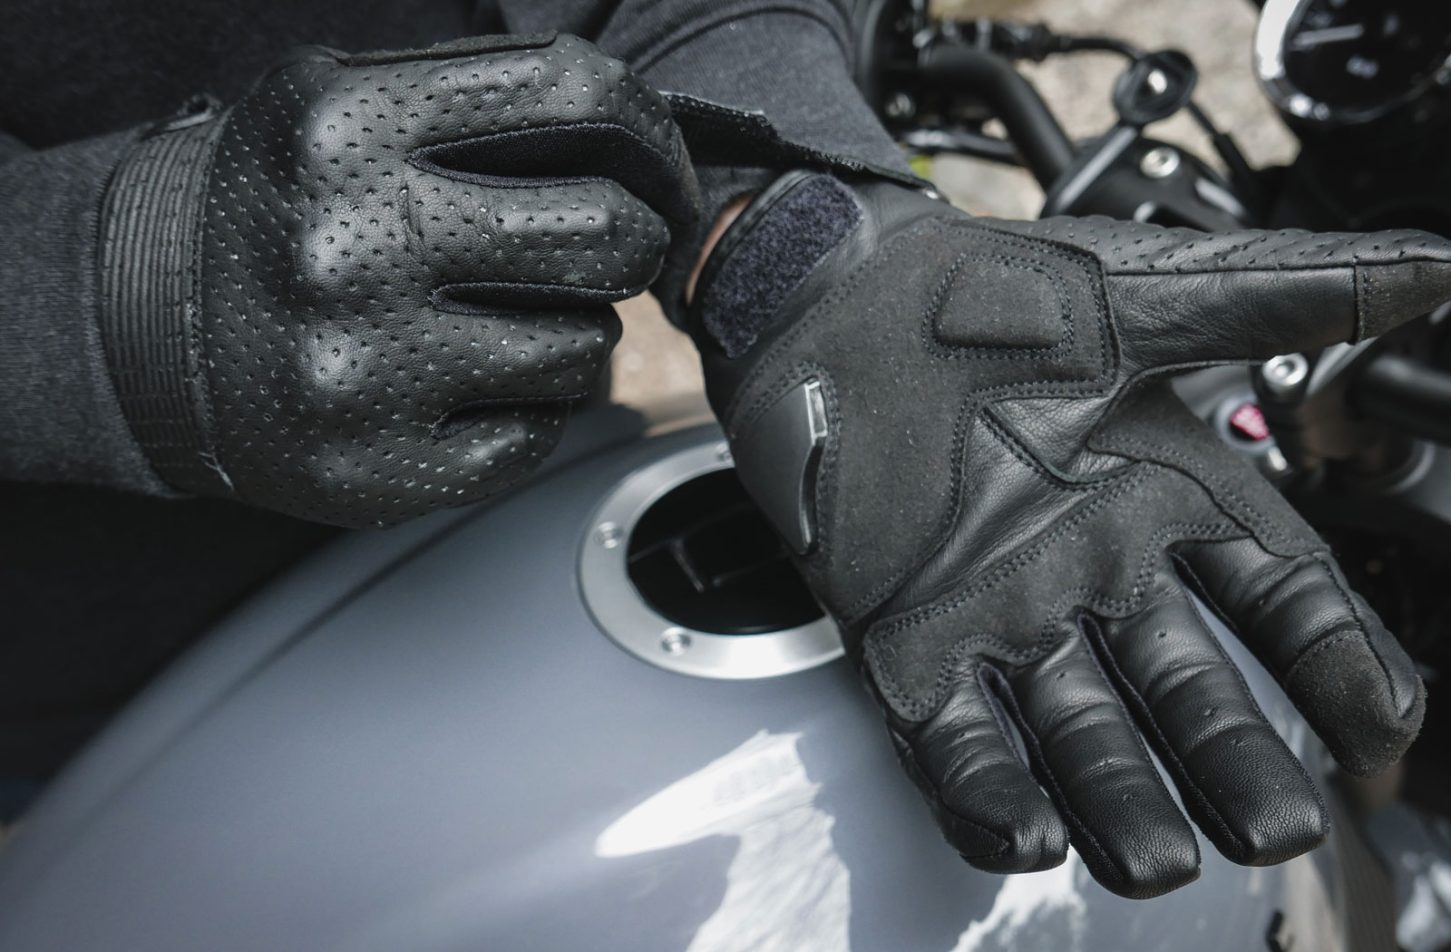 Riding Gear Review: Pando Moto Onyx Black 01 Leather Gloves - Return of ...